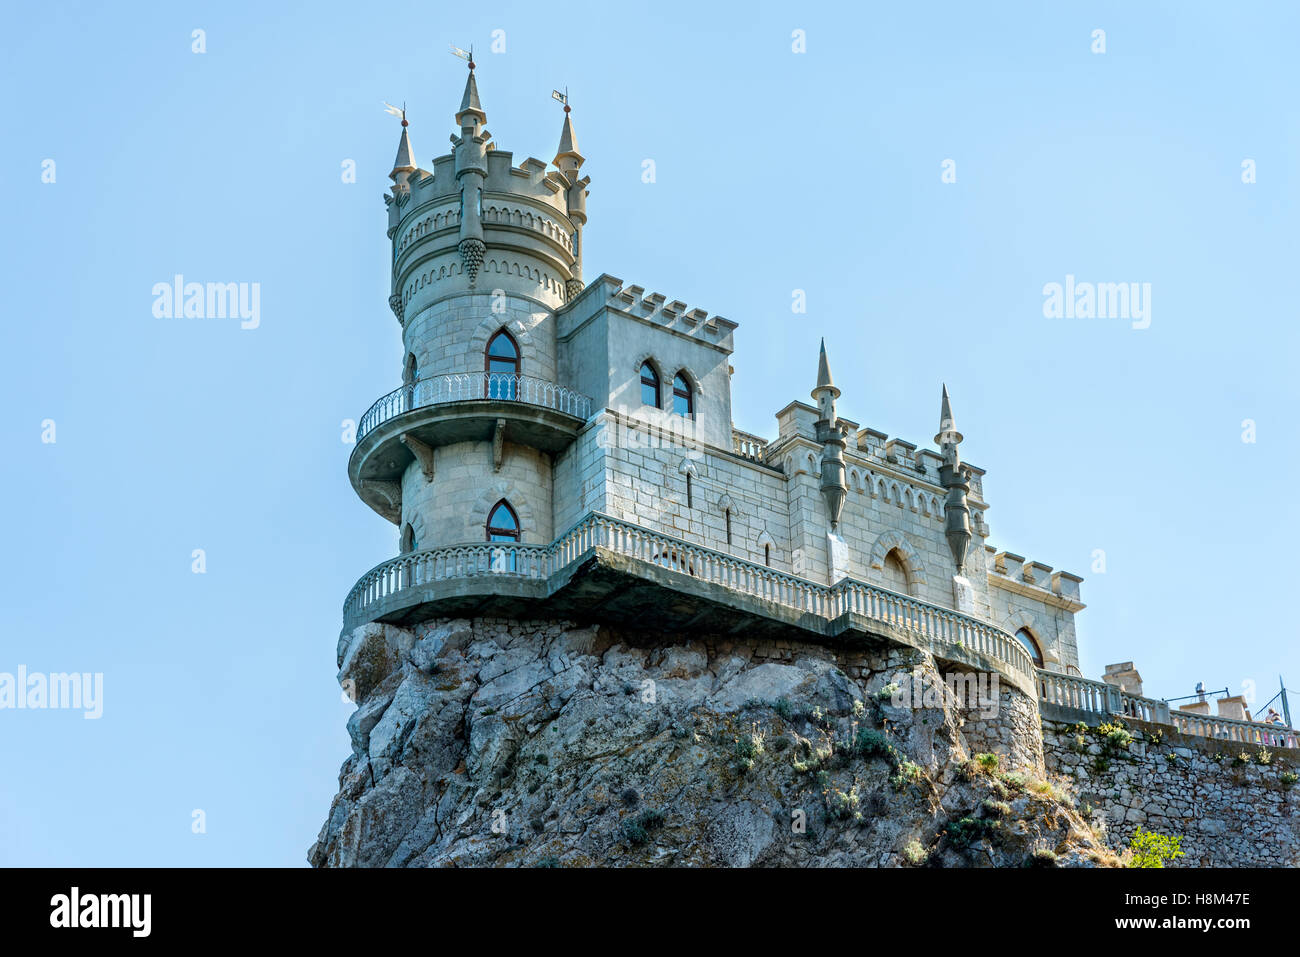 The ancient castle Swallow's Nest on a background of blue sky Stock Photo